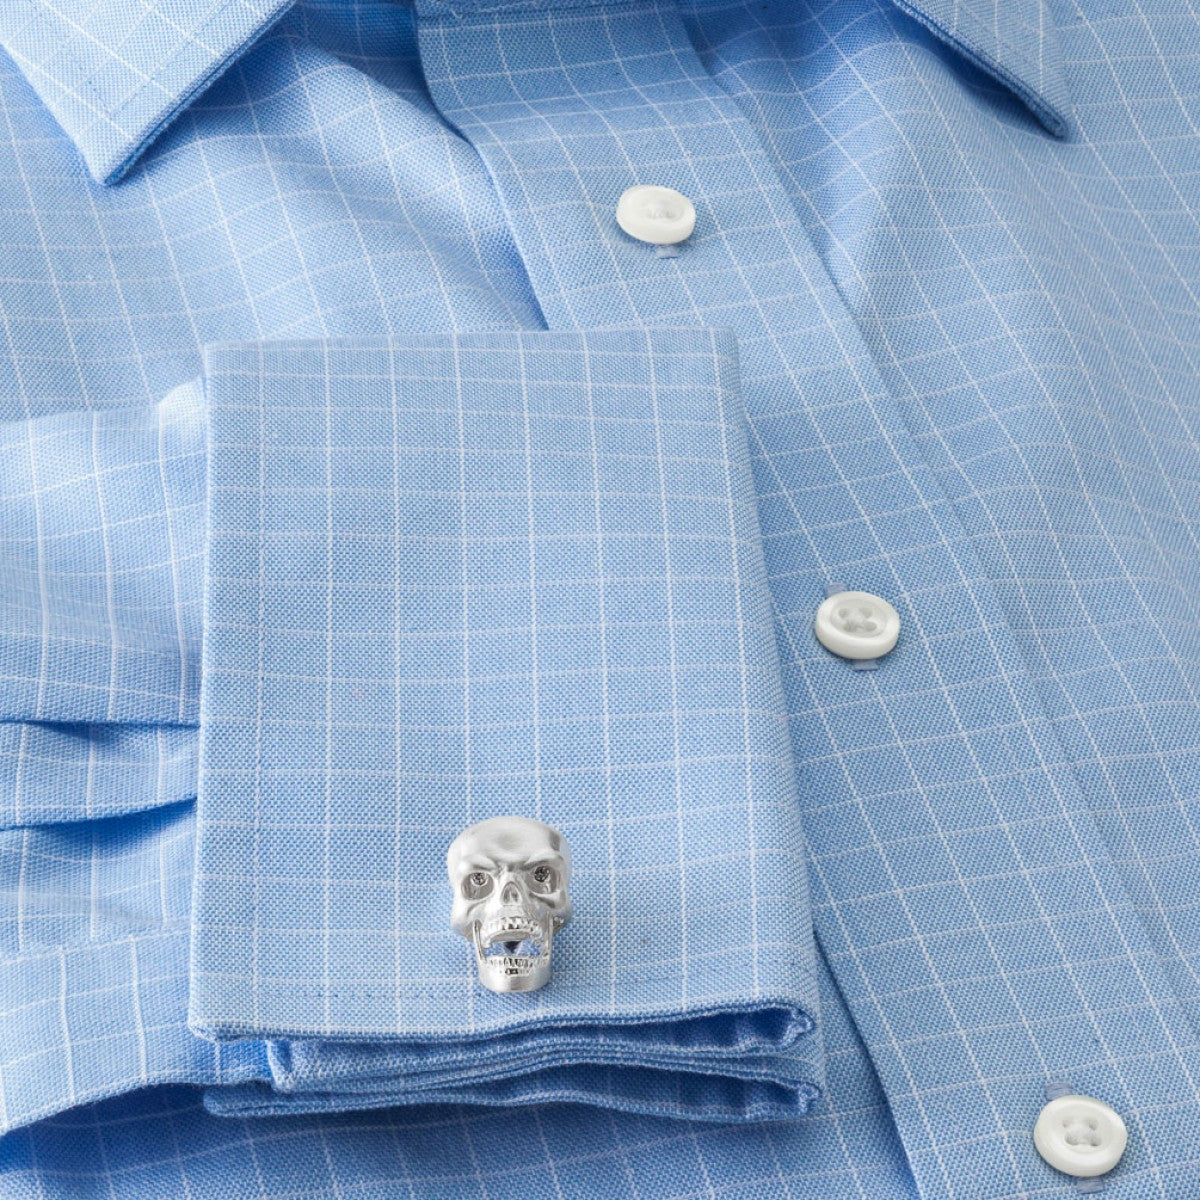 Deakin and Francis Skull Cufflinks with Diamond Eyes and Moving Jaw, Sterling Silver